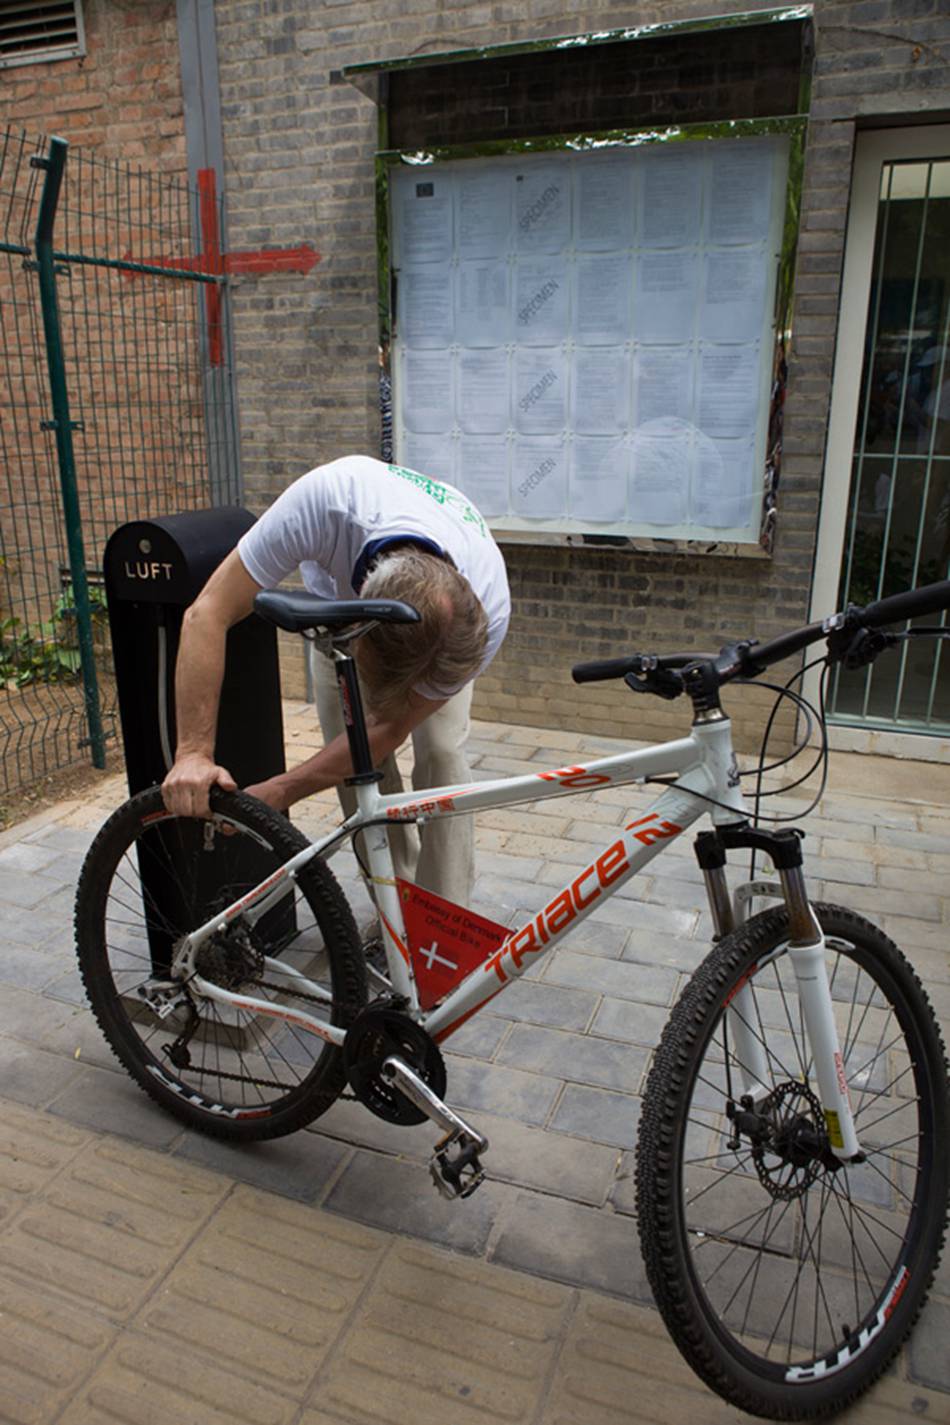 Arne Petersen, Denmark's ambassador to China, demonstrates how to use the 24-hour bicycle pump at the Danish Embassy in Beijing, so cyclists passing by can pump up their tires for free. [Photo: CRIENGLISH.com/ Cui Chaoqun]